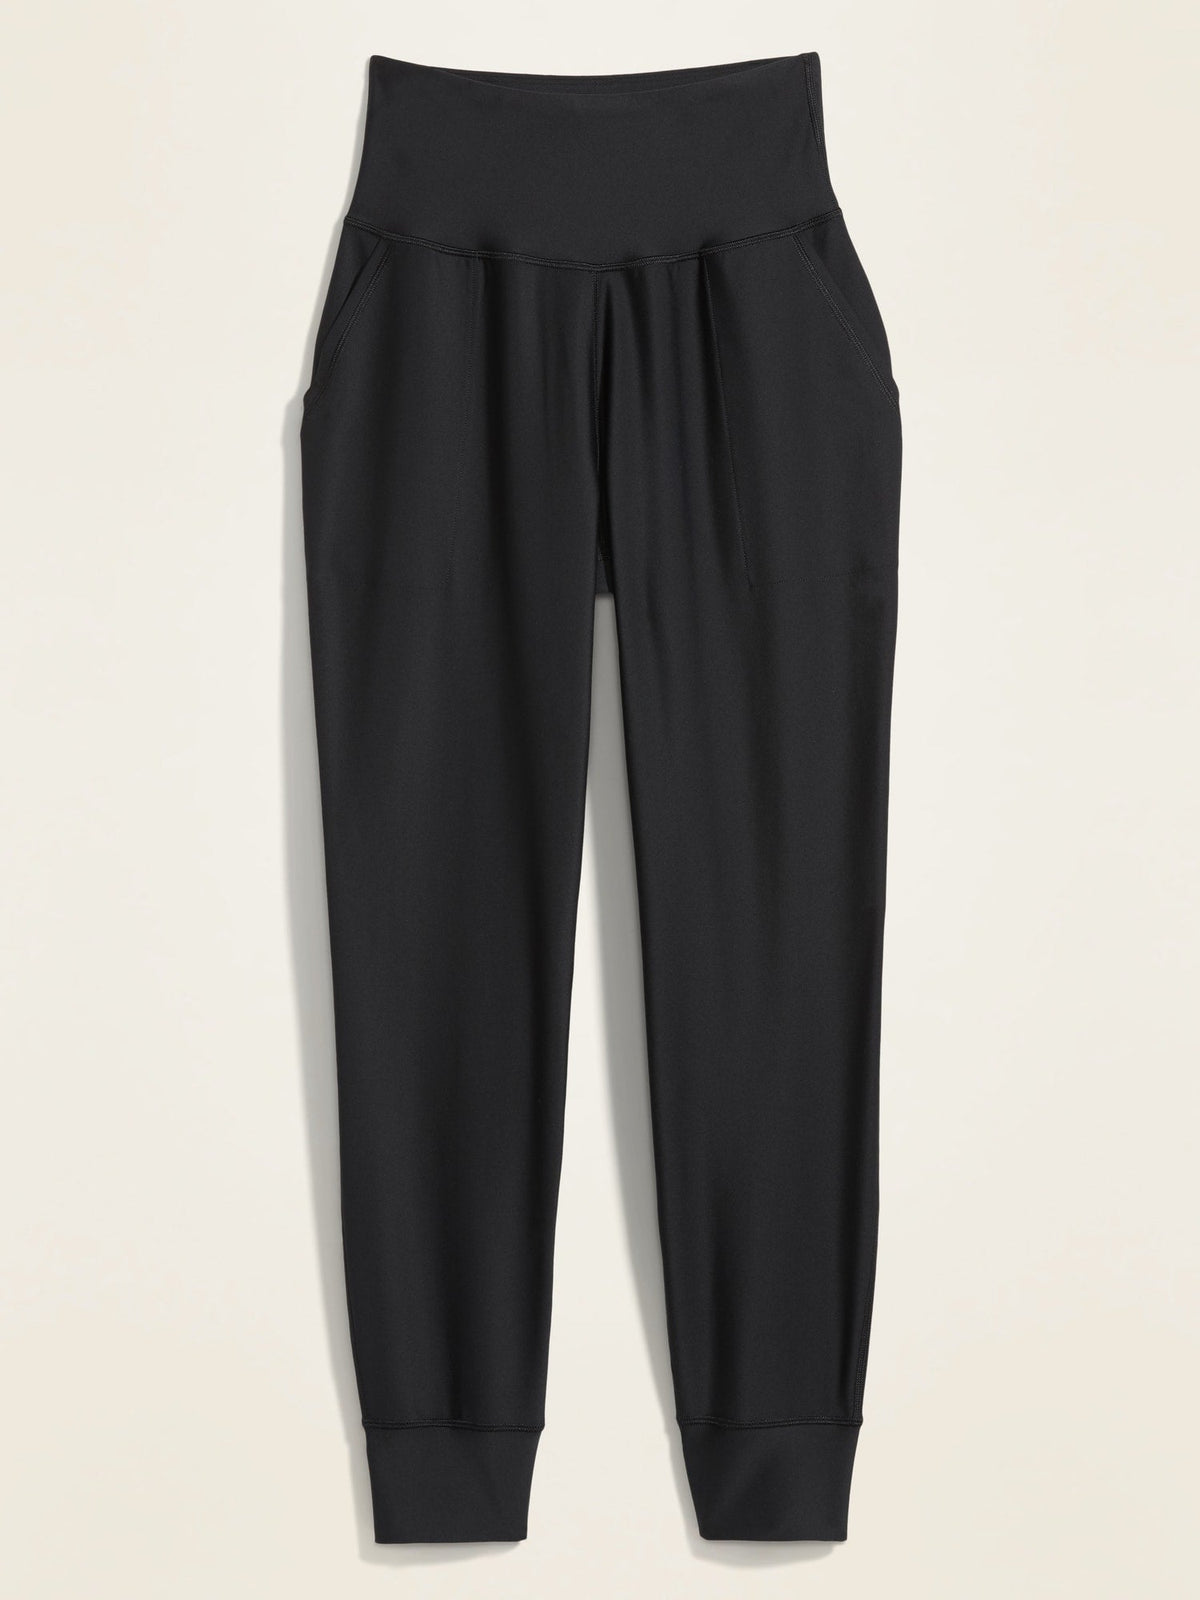 High-Waisted PowerSoft 7/8 Joggers for Women